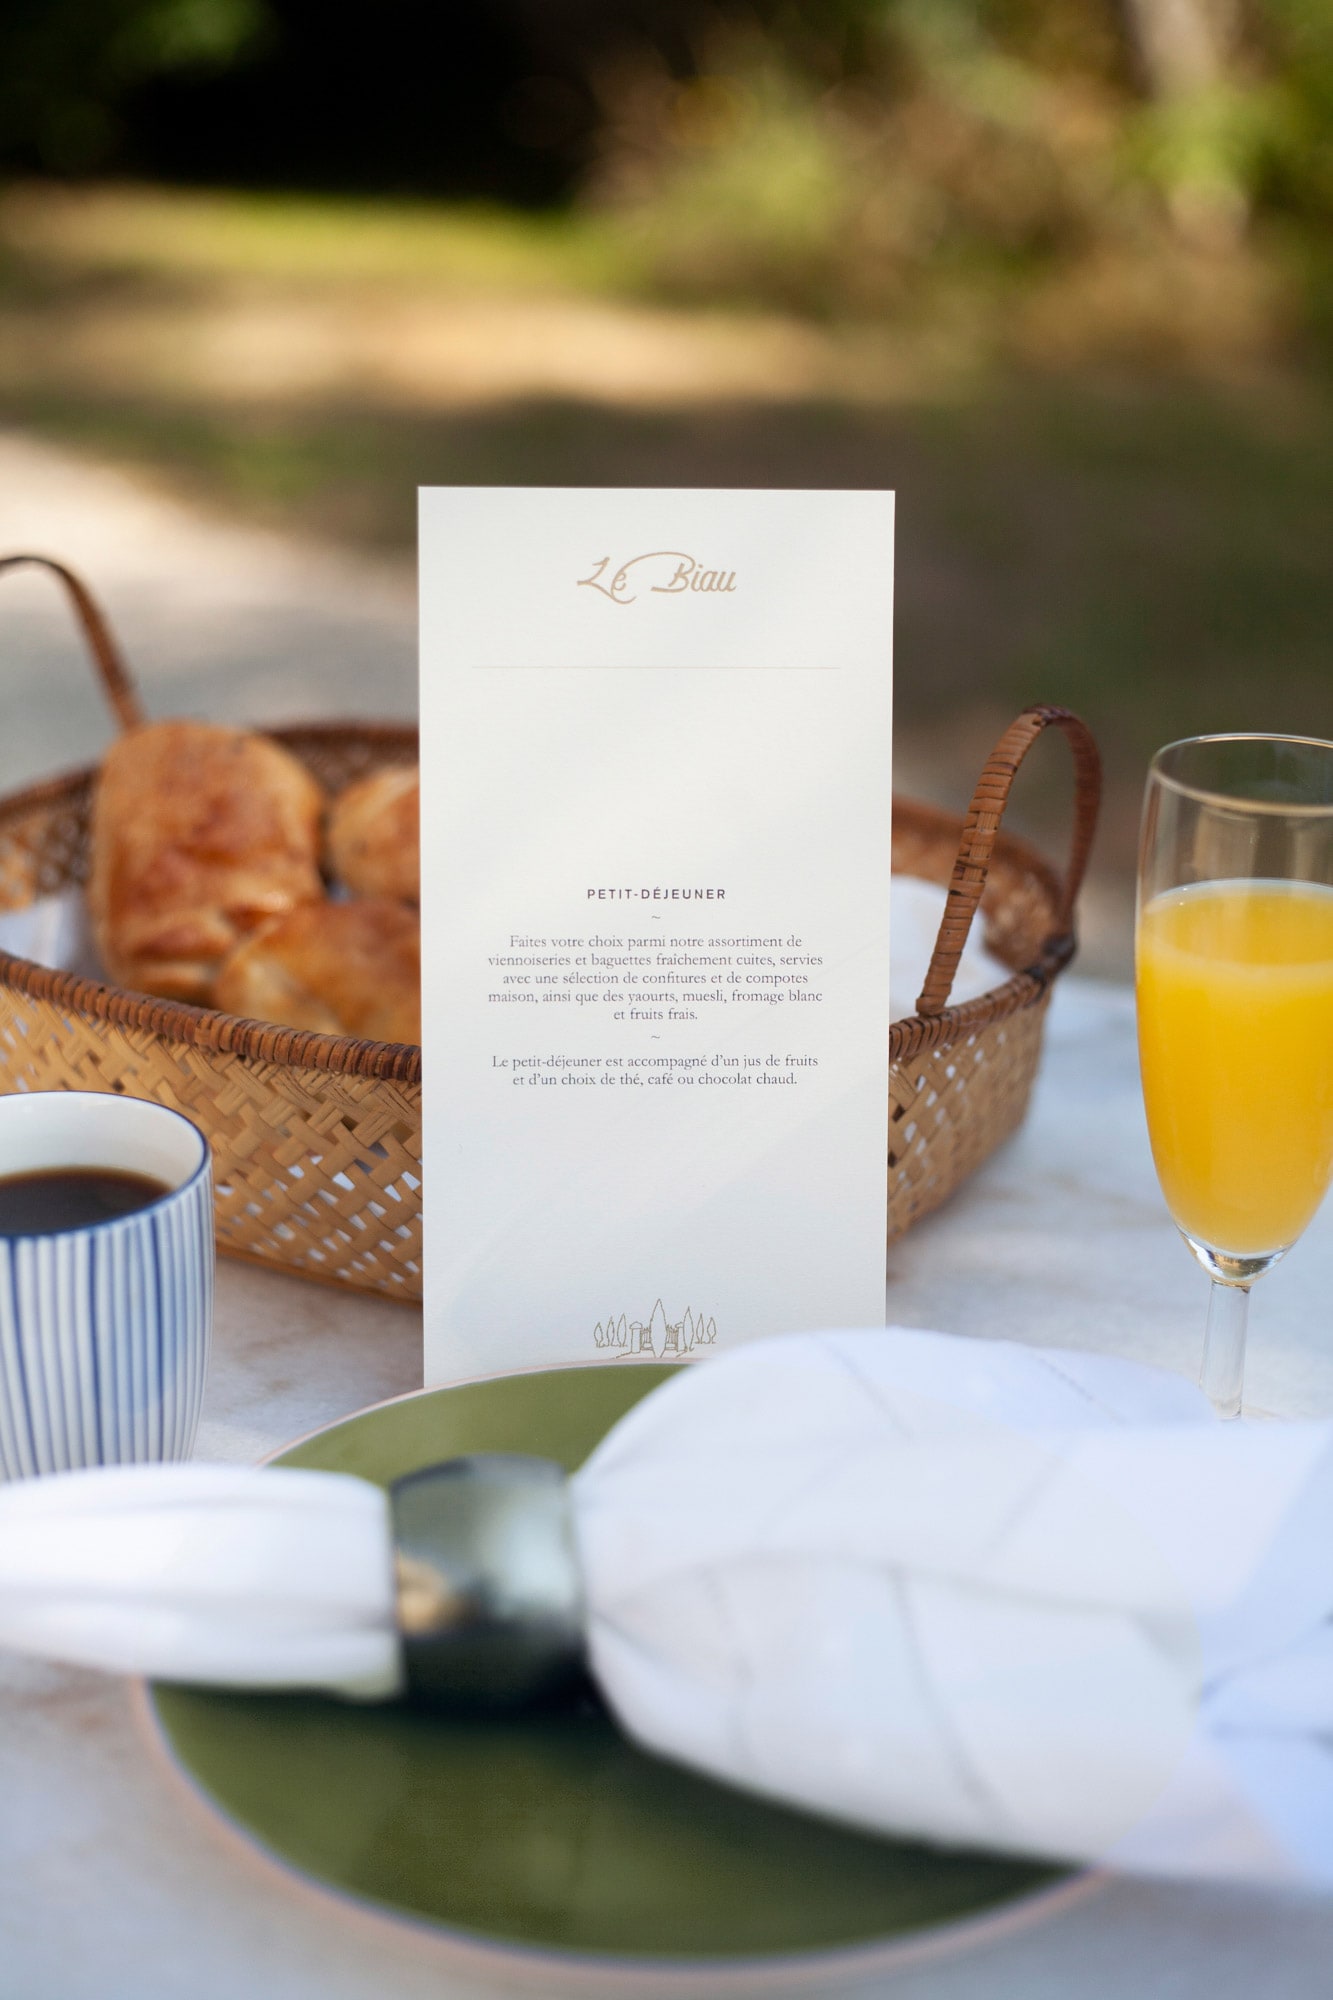 Le Biau chambres d’hôte in the south of france. Printed collateral – Menu